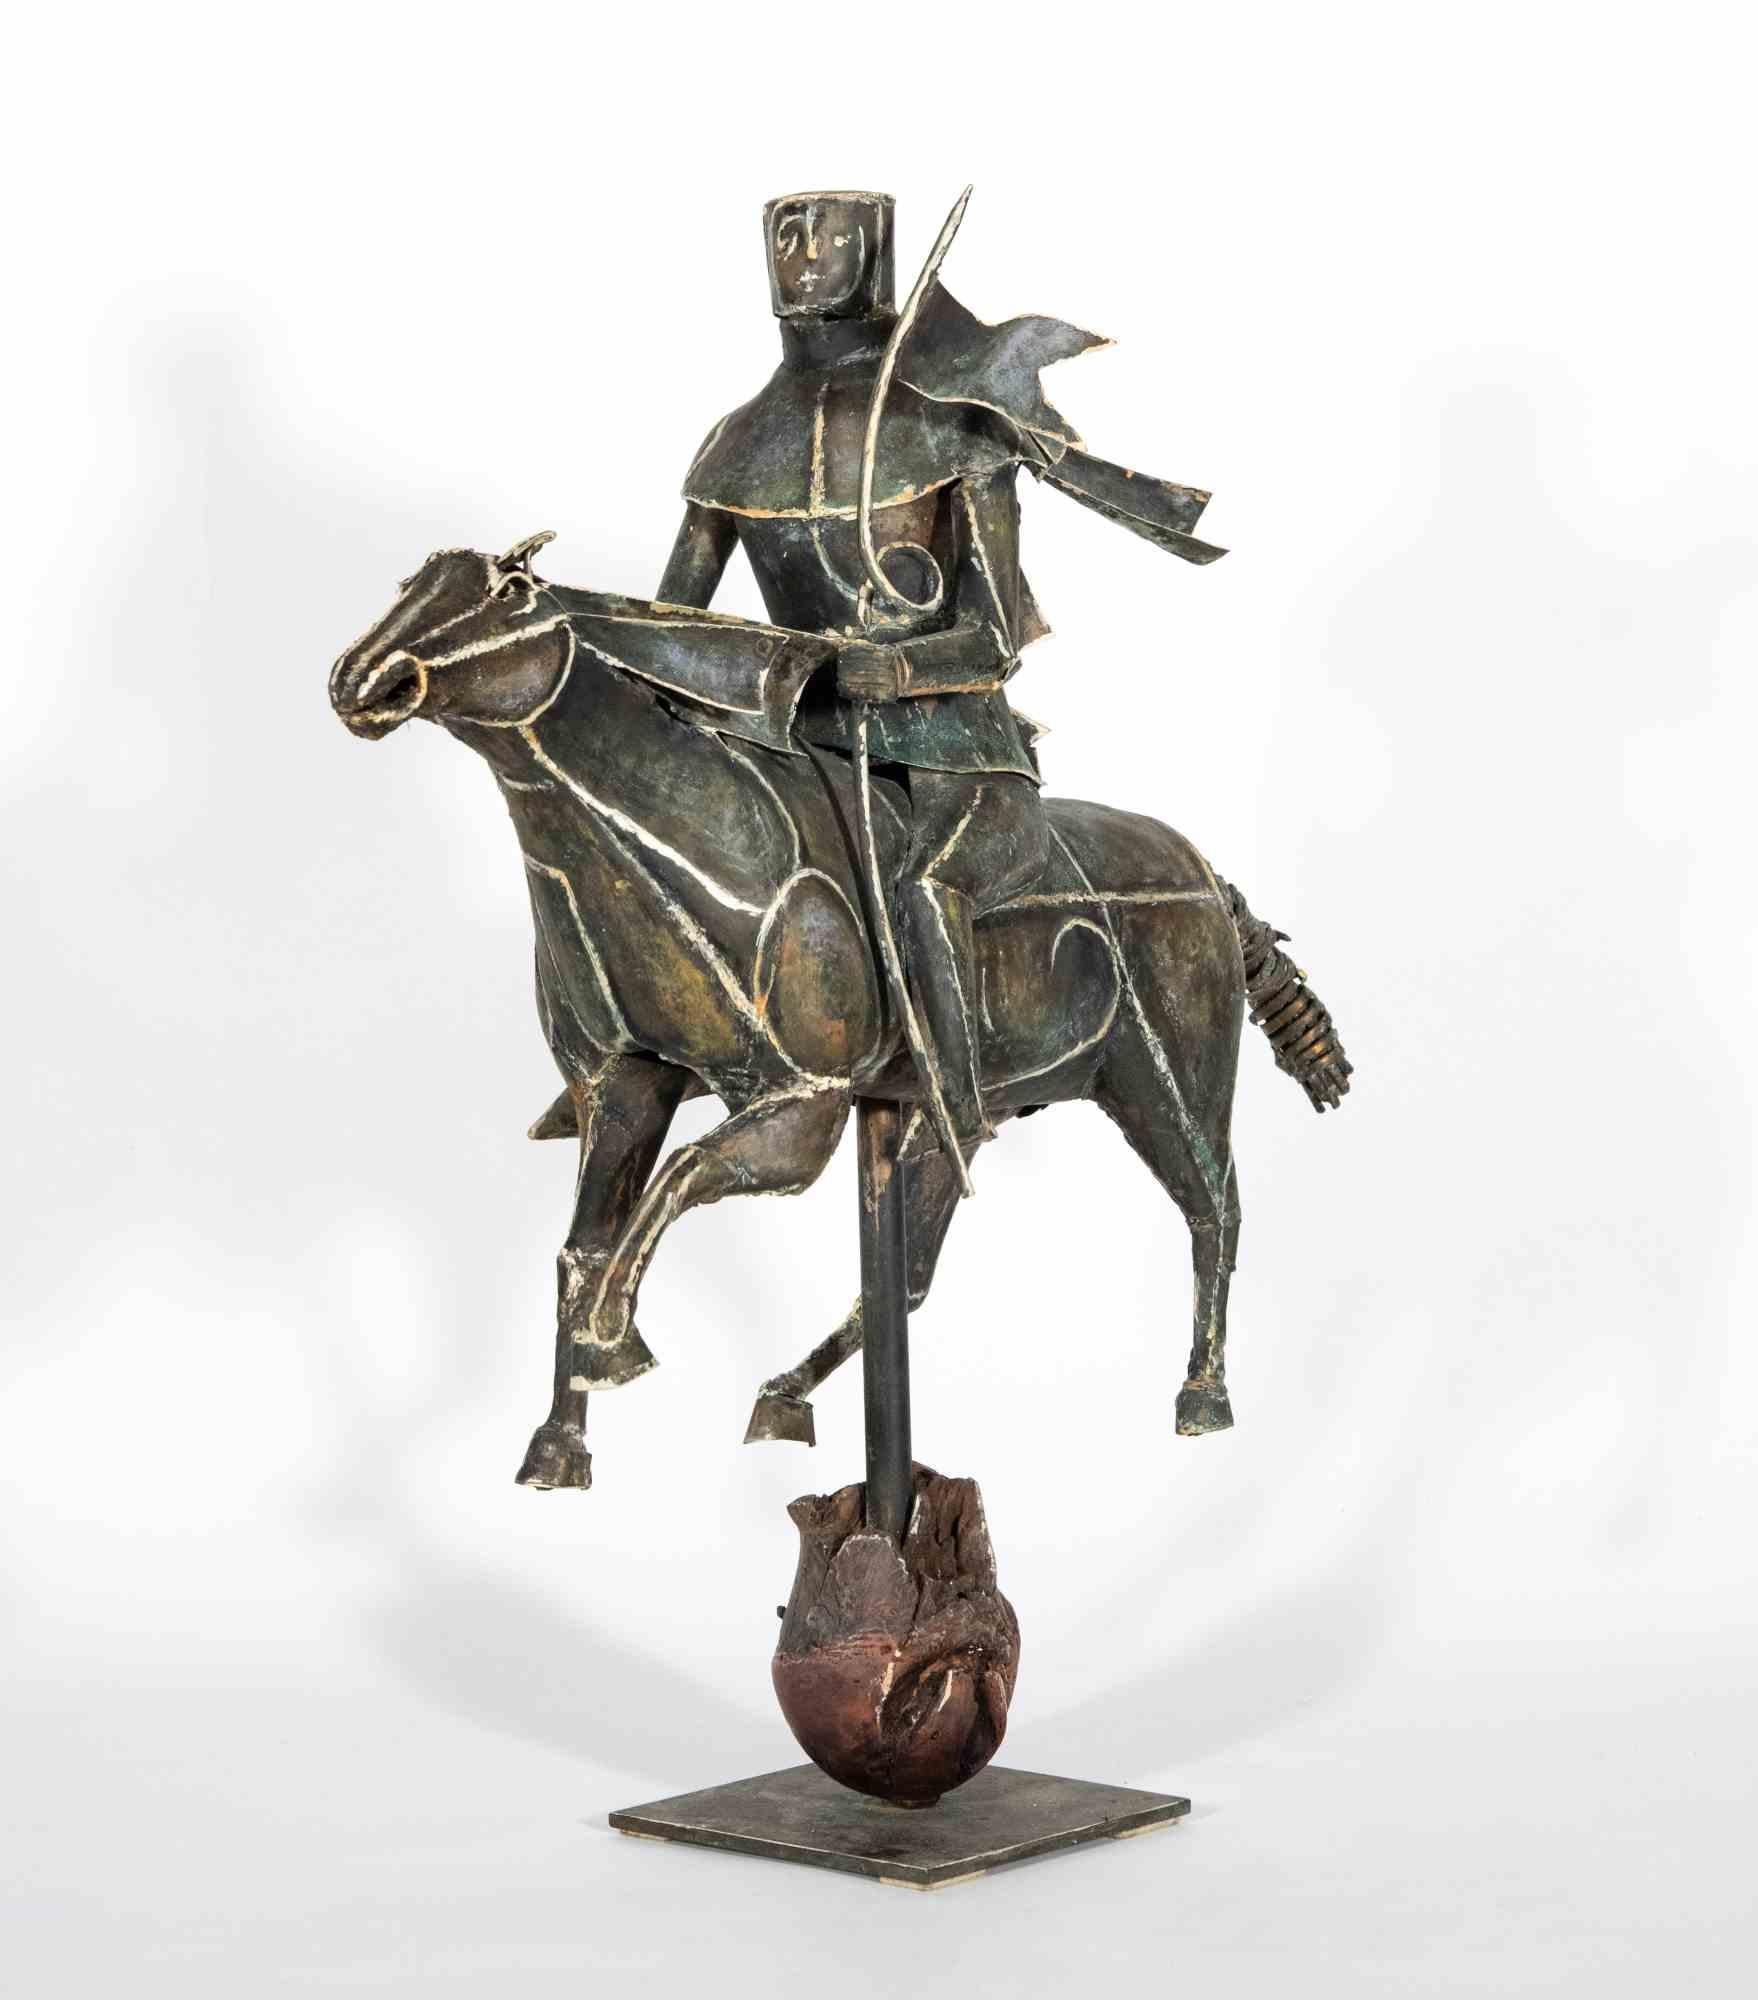 A Mighty Sculpture, in Excellent Condition, an Authentic Brass Creation of 1975, proposed by the Sculptor Lorenzo Servalli, with which the Artist celebrates Courage and Strength, narrating them as a Knight clad in his heavy Armour who, riding his